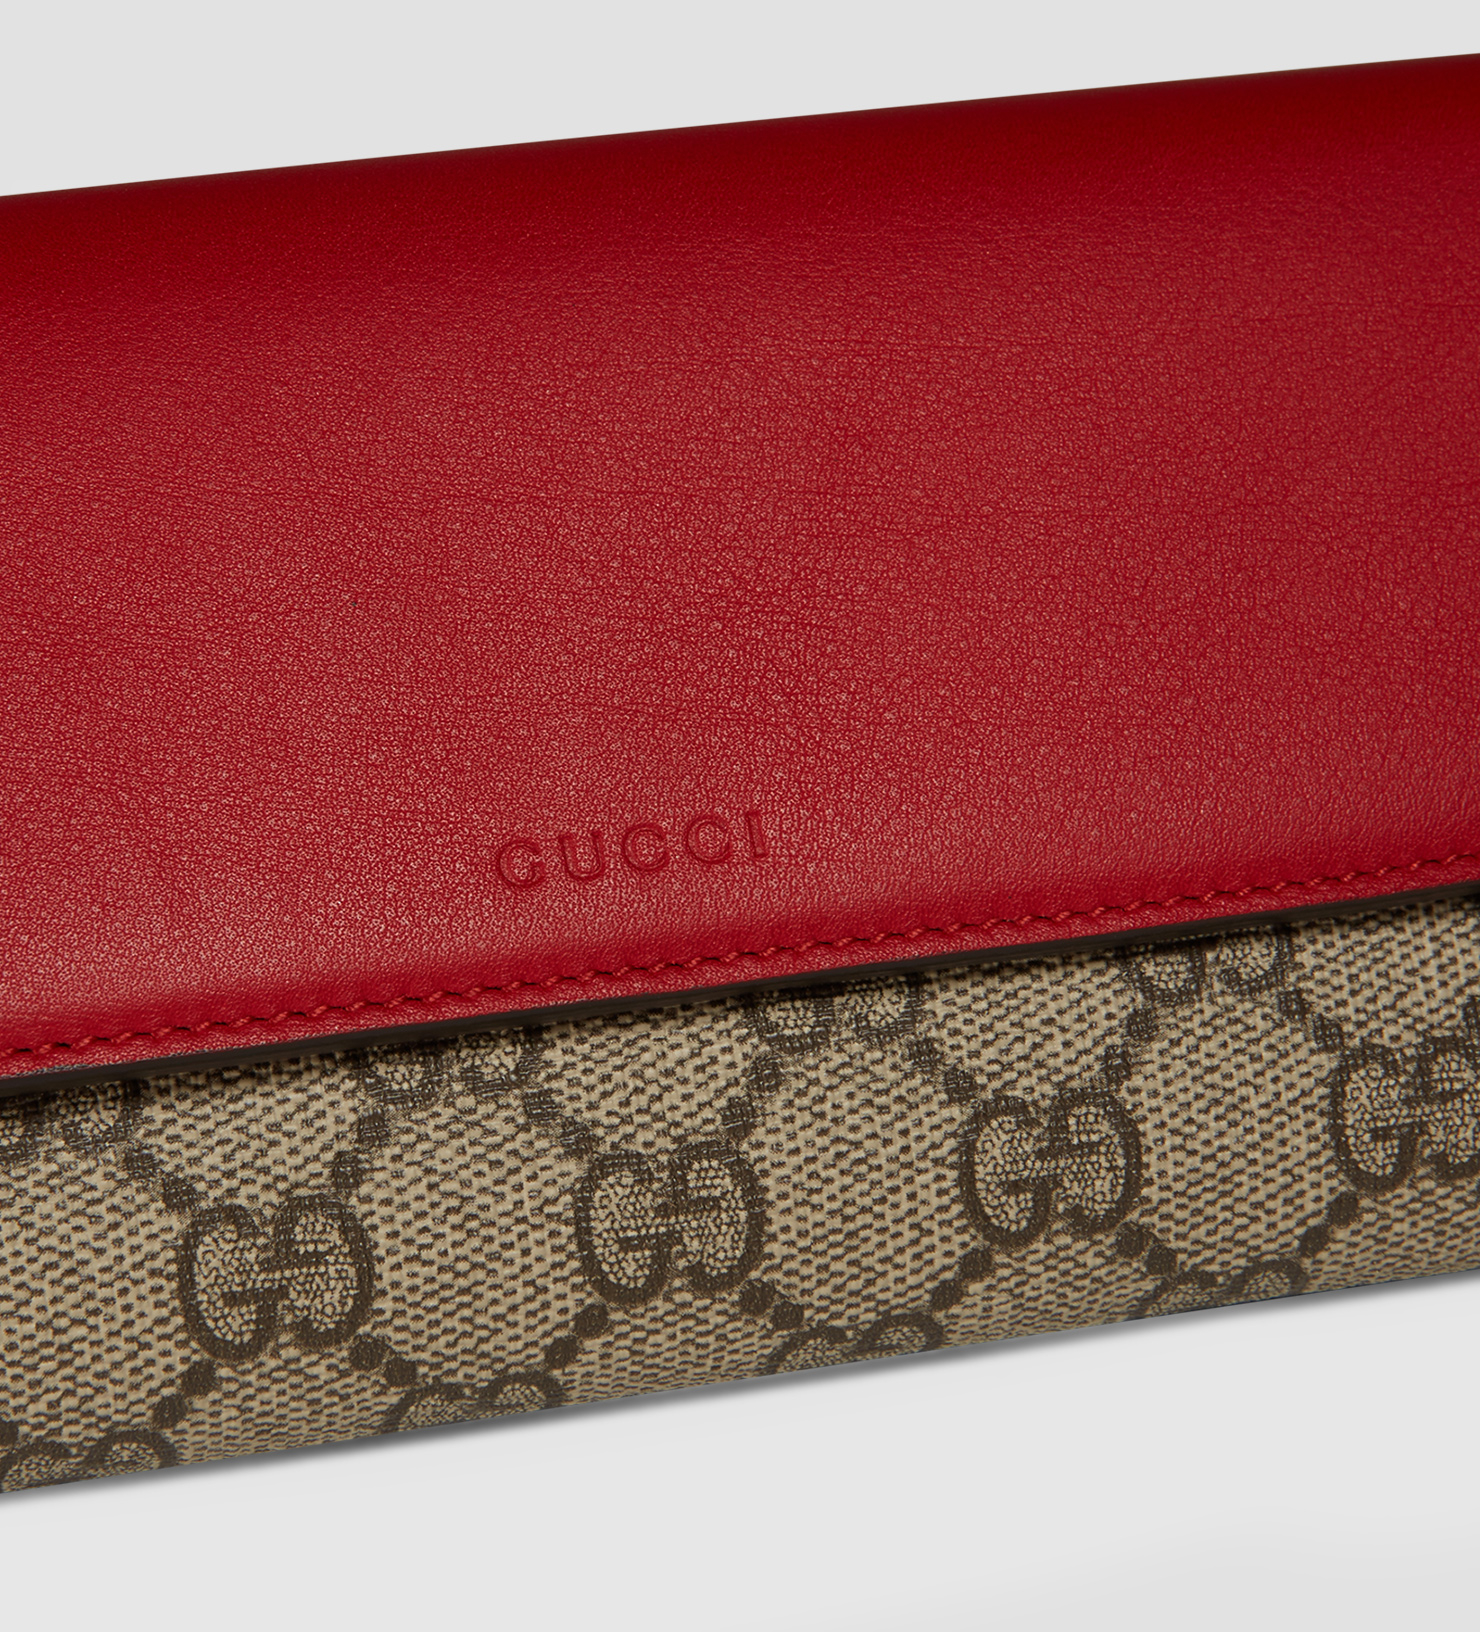 Gucci Gg Supreme Wallet in Red | Lyst